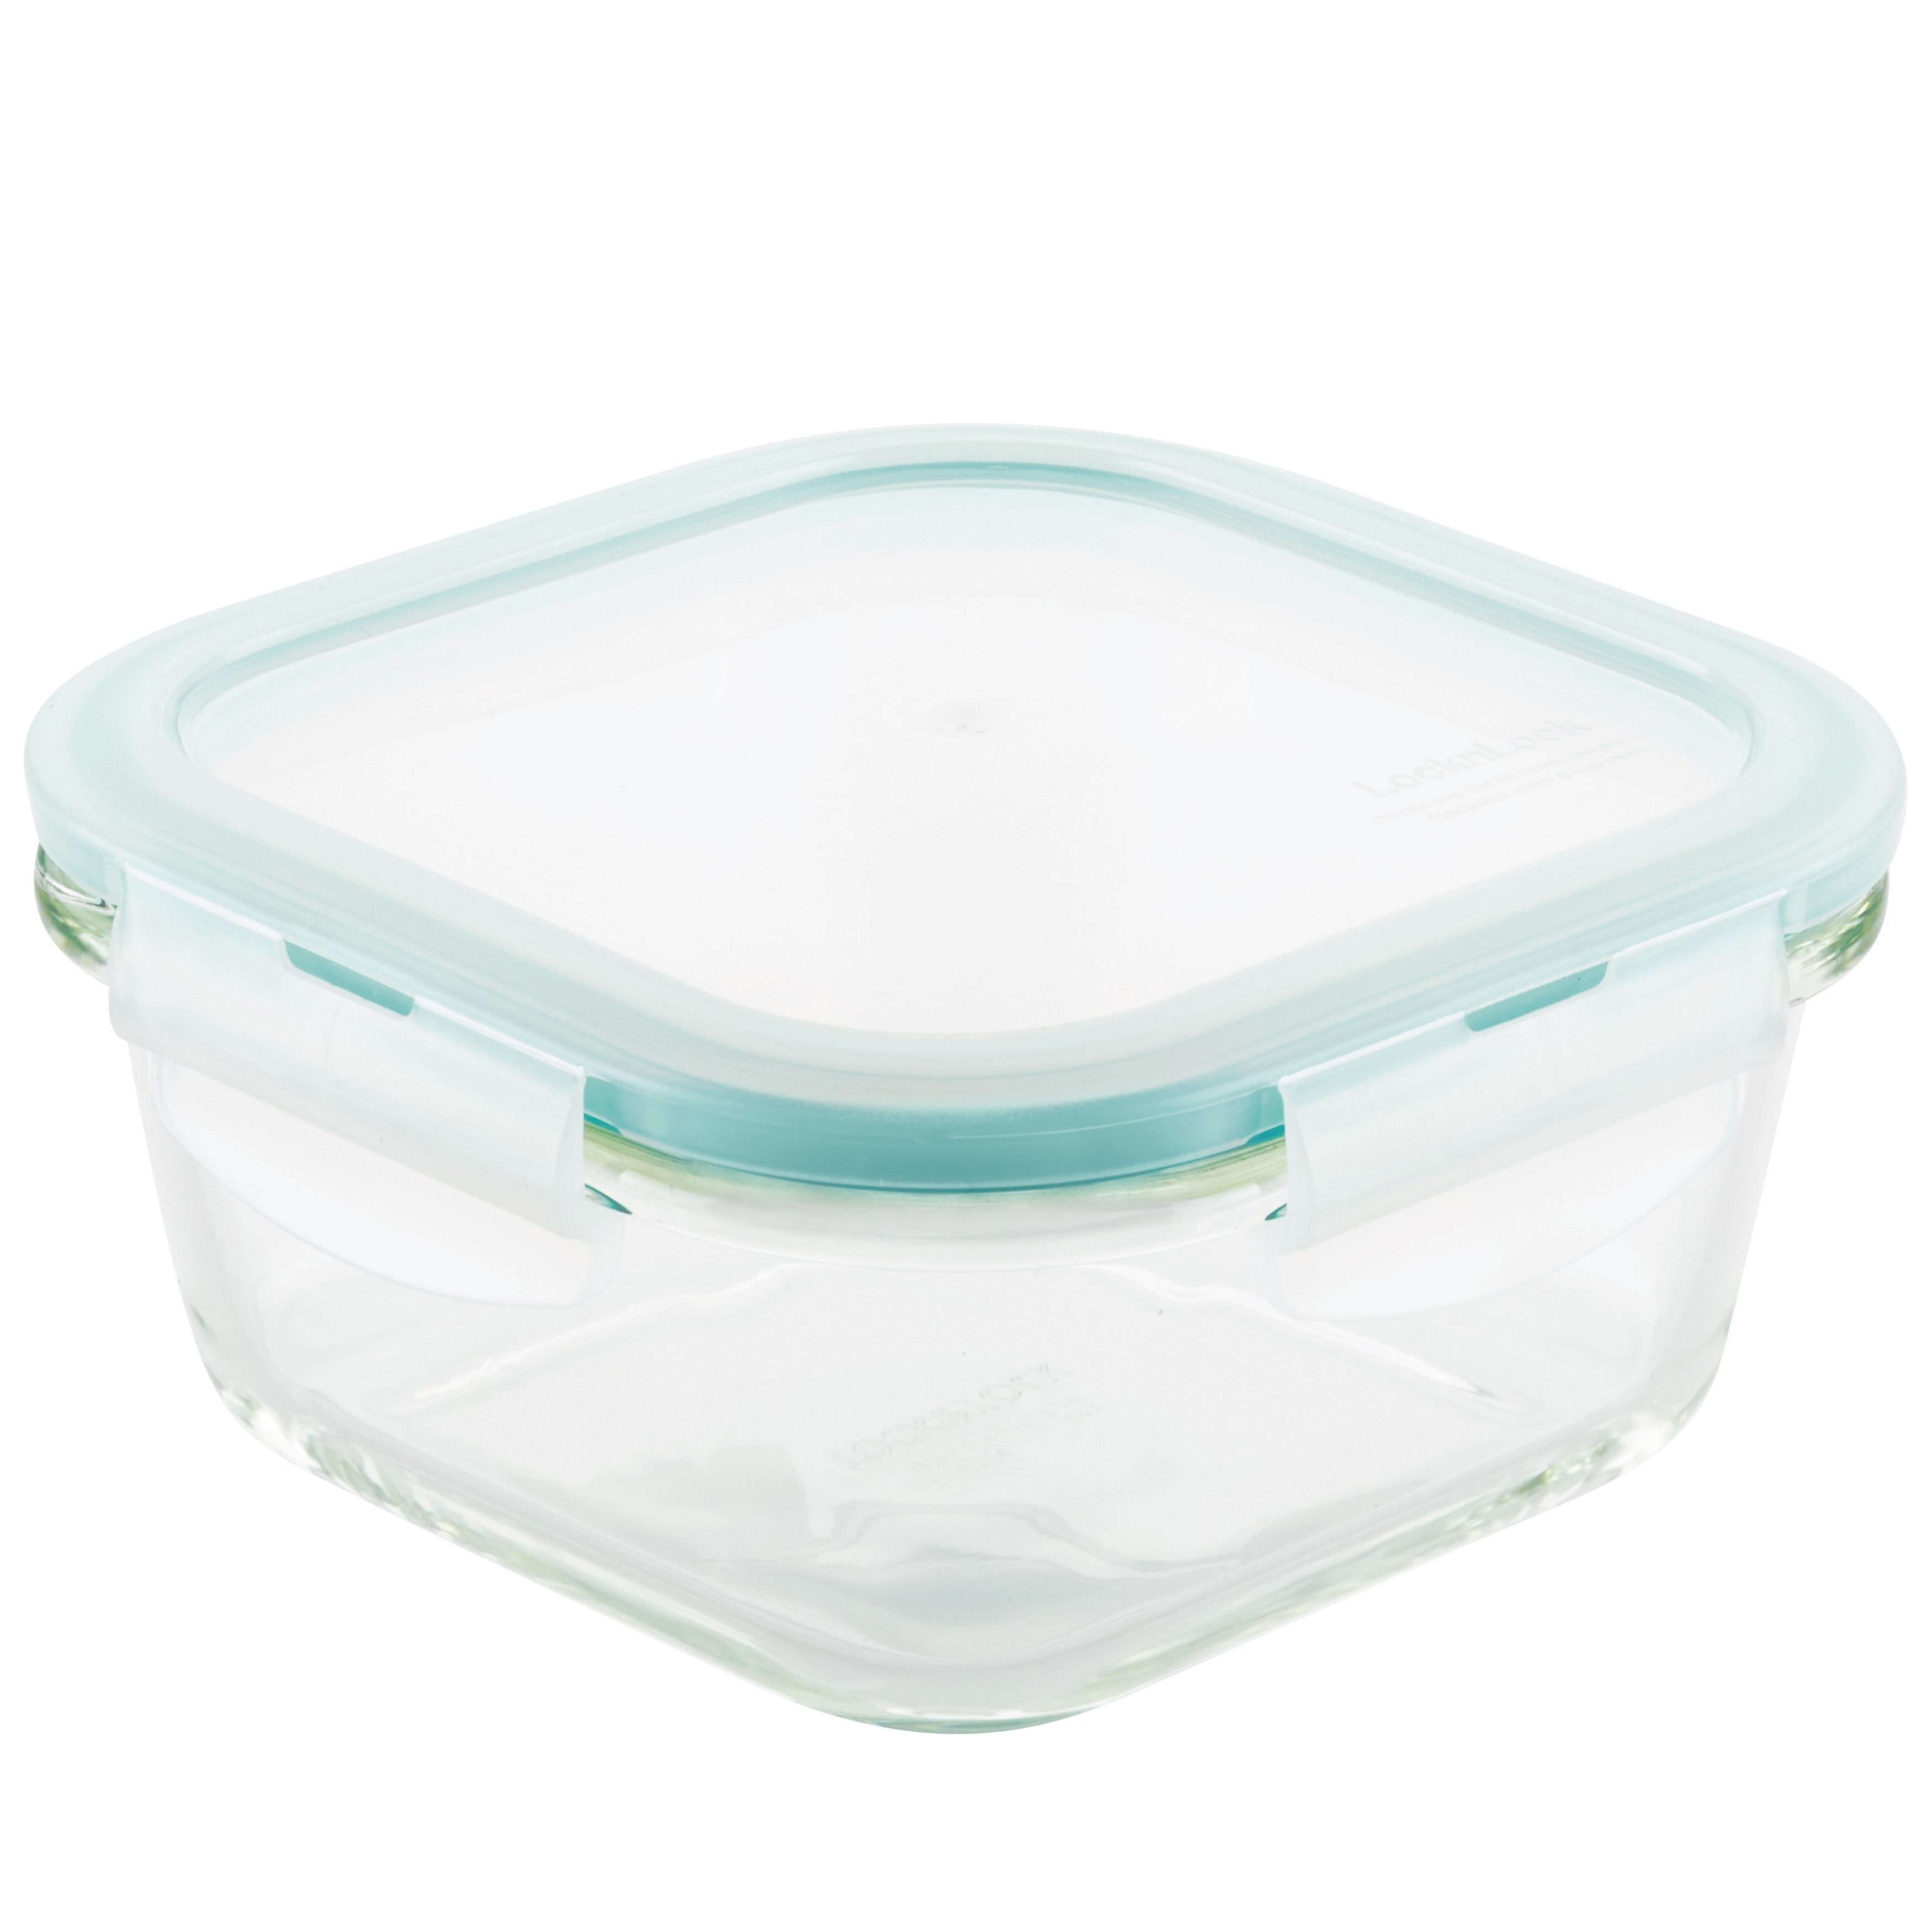 https://ak1.ostkcdn.com/images/products/29013406/Lock-and-Lock-Purely-Better-Glass-Square-Food-Storage-Container-17oz-da1042b7-44ba-4444-8760-5bb77e839598.jpg